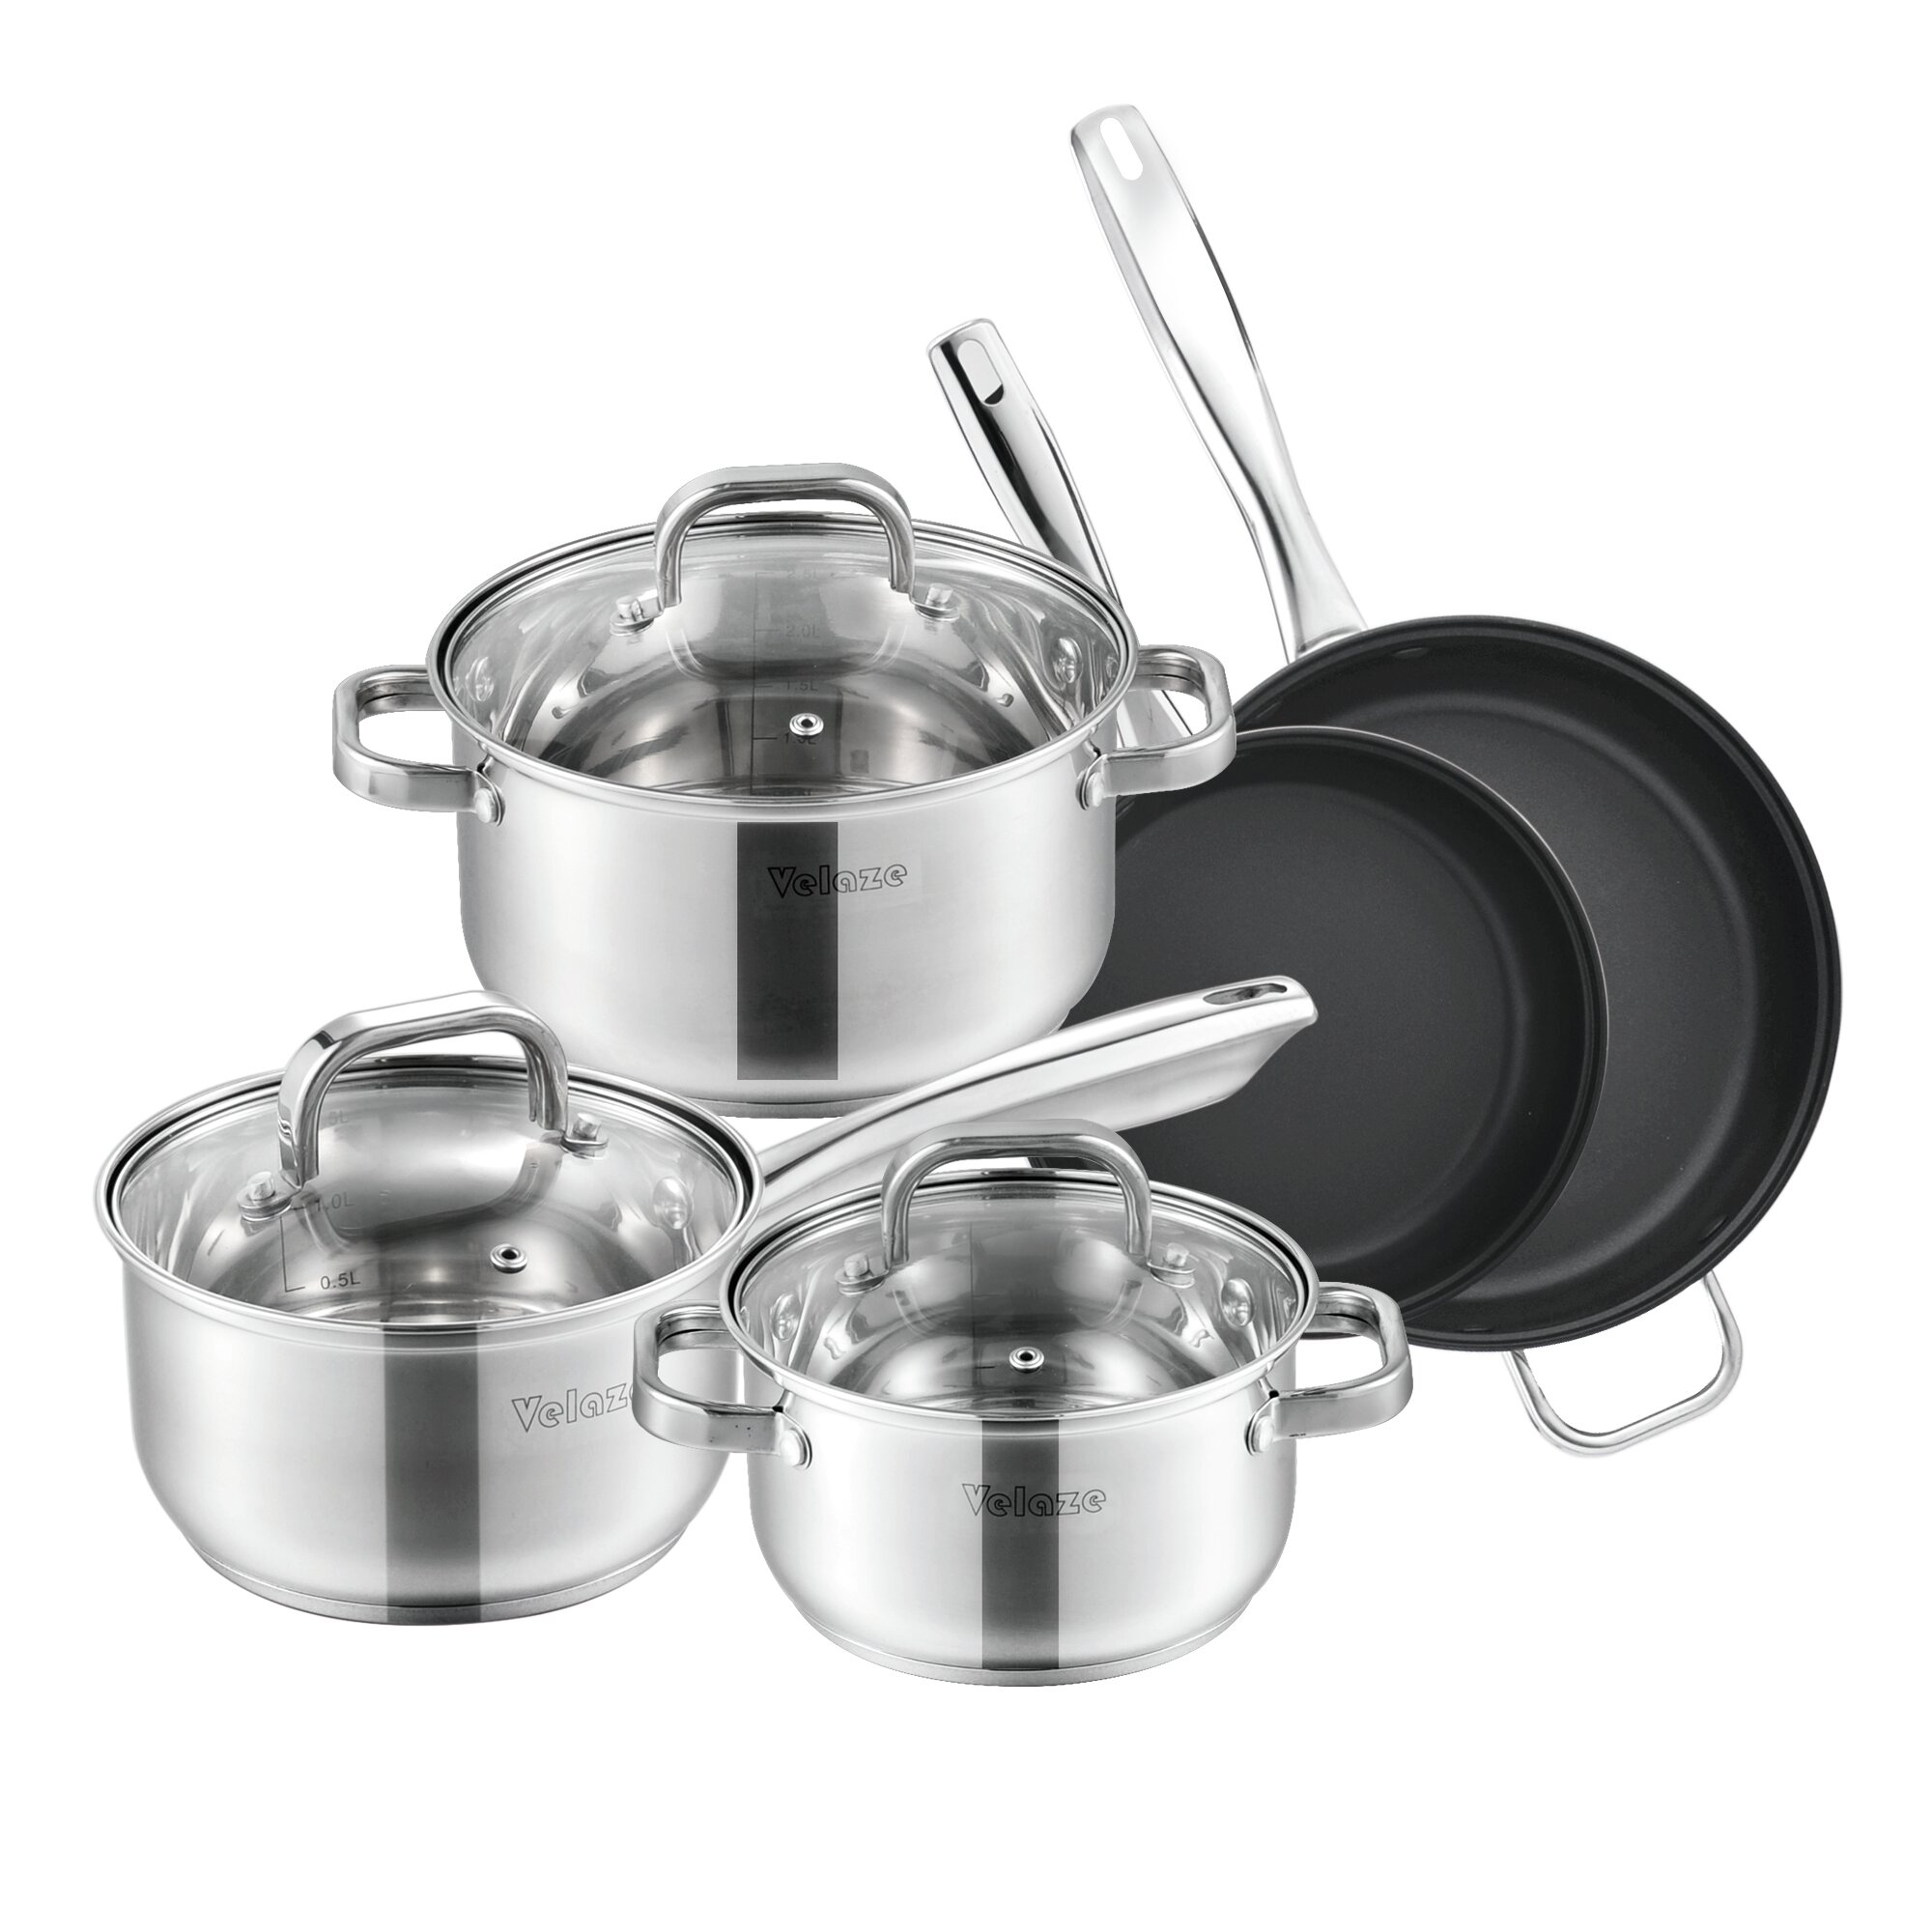 Velaze 14-Piece Stainless Steel Cookware Set Pot and Pan Sets with